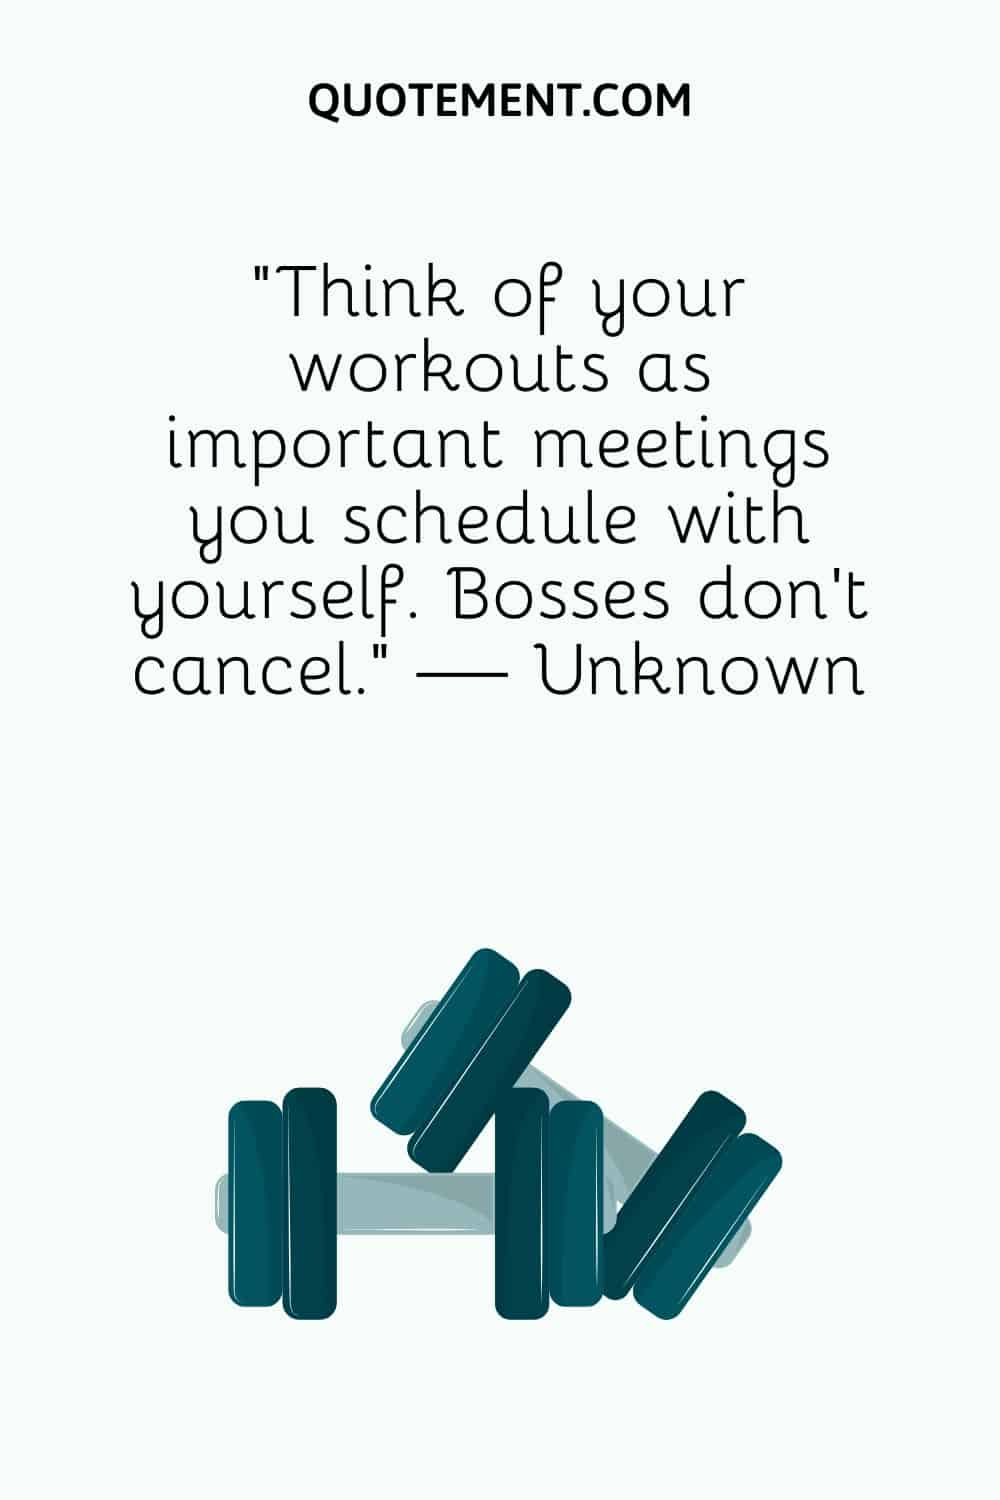 “Think of your workouts as important meetings you schedule with yourself. Bosses don’t cancel.” — Unknown